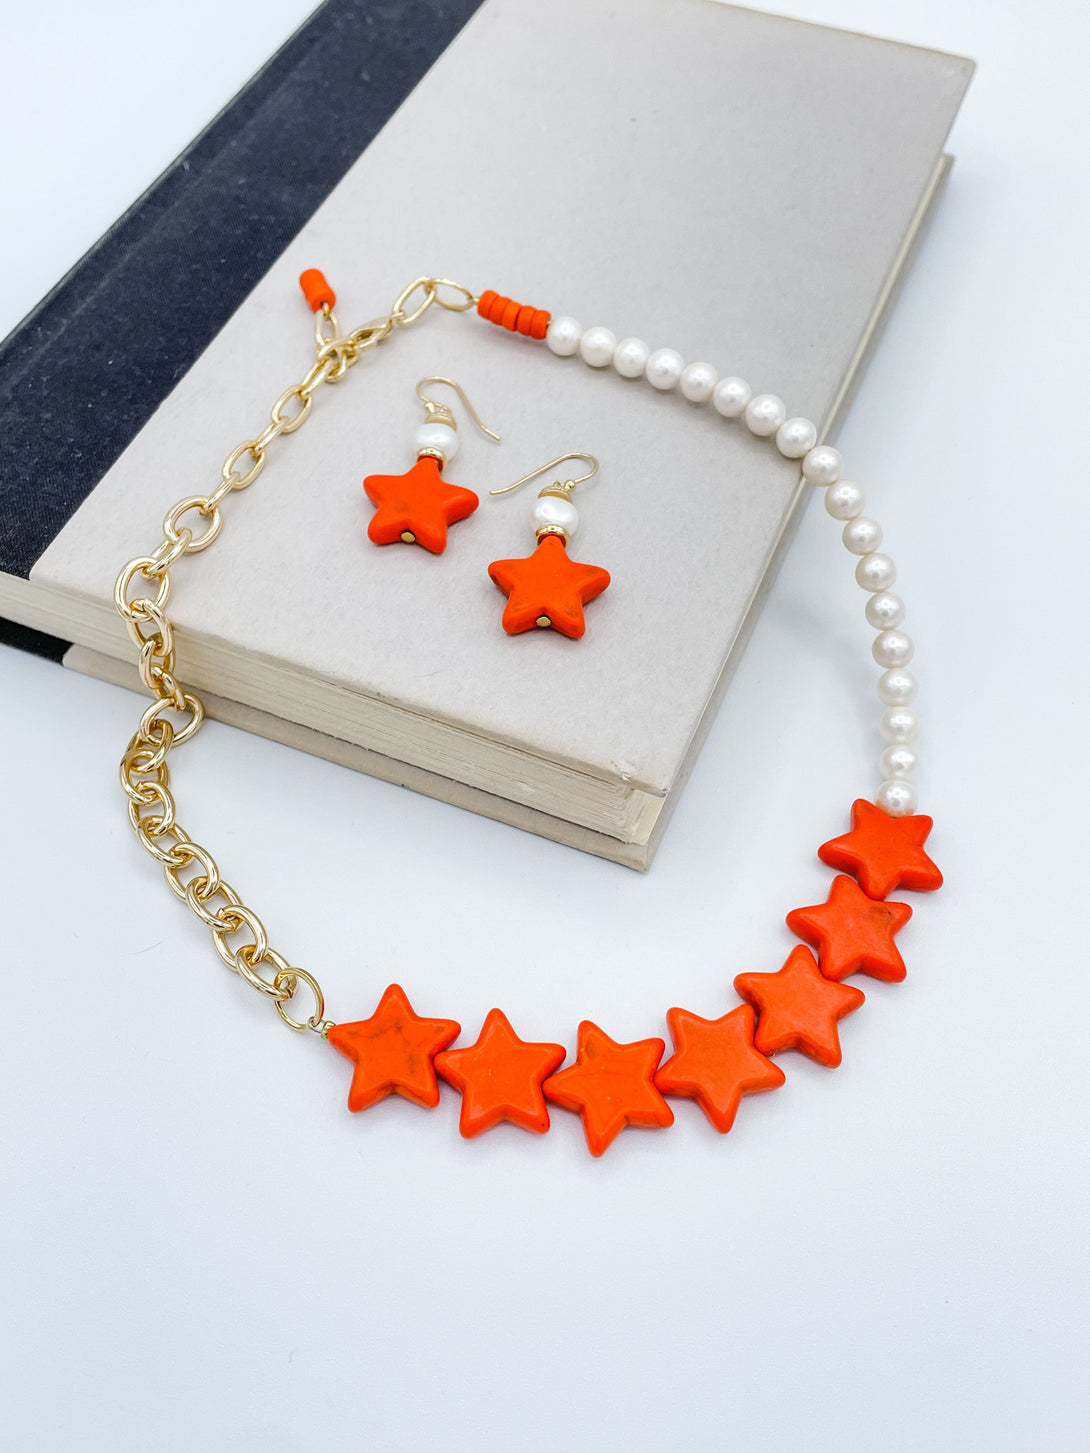 Seven Orange Star Necklace with Gold Chain and Pearls